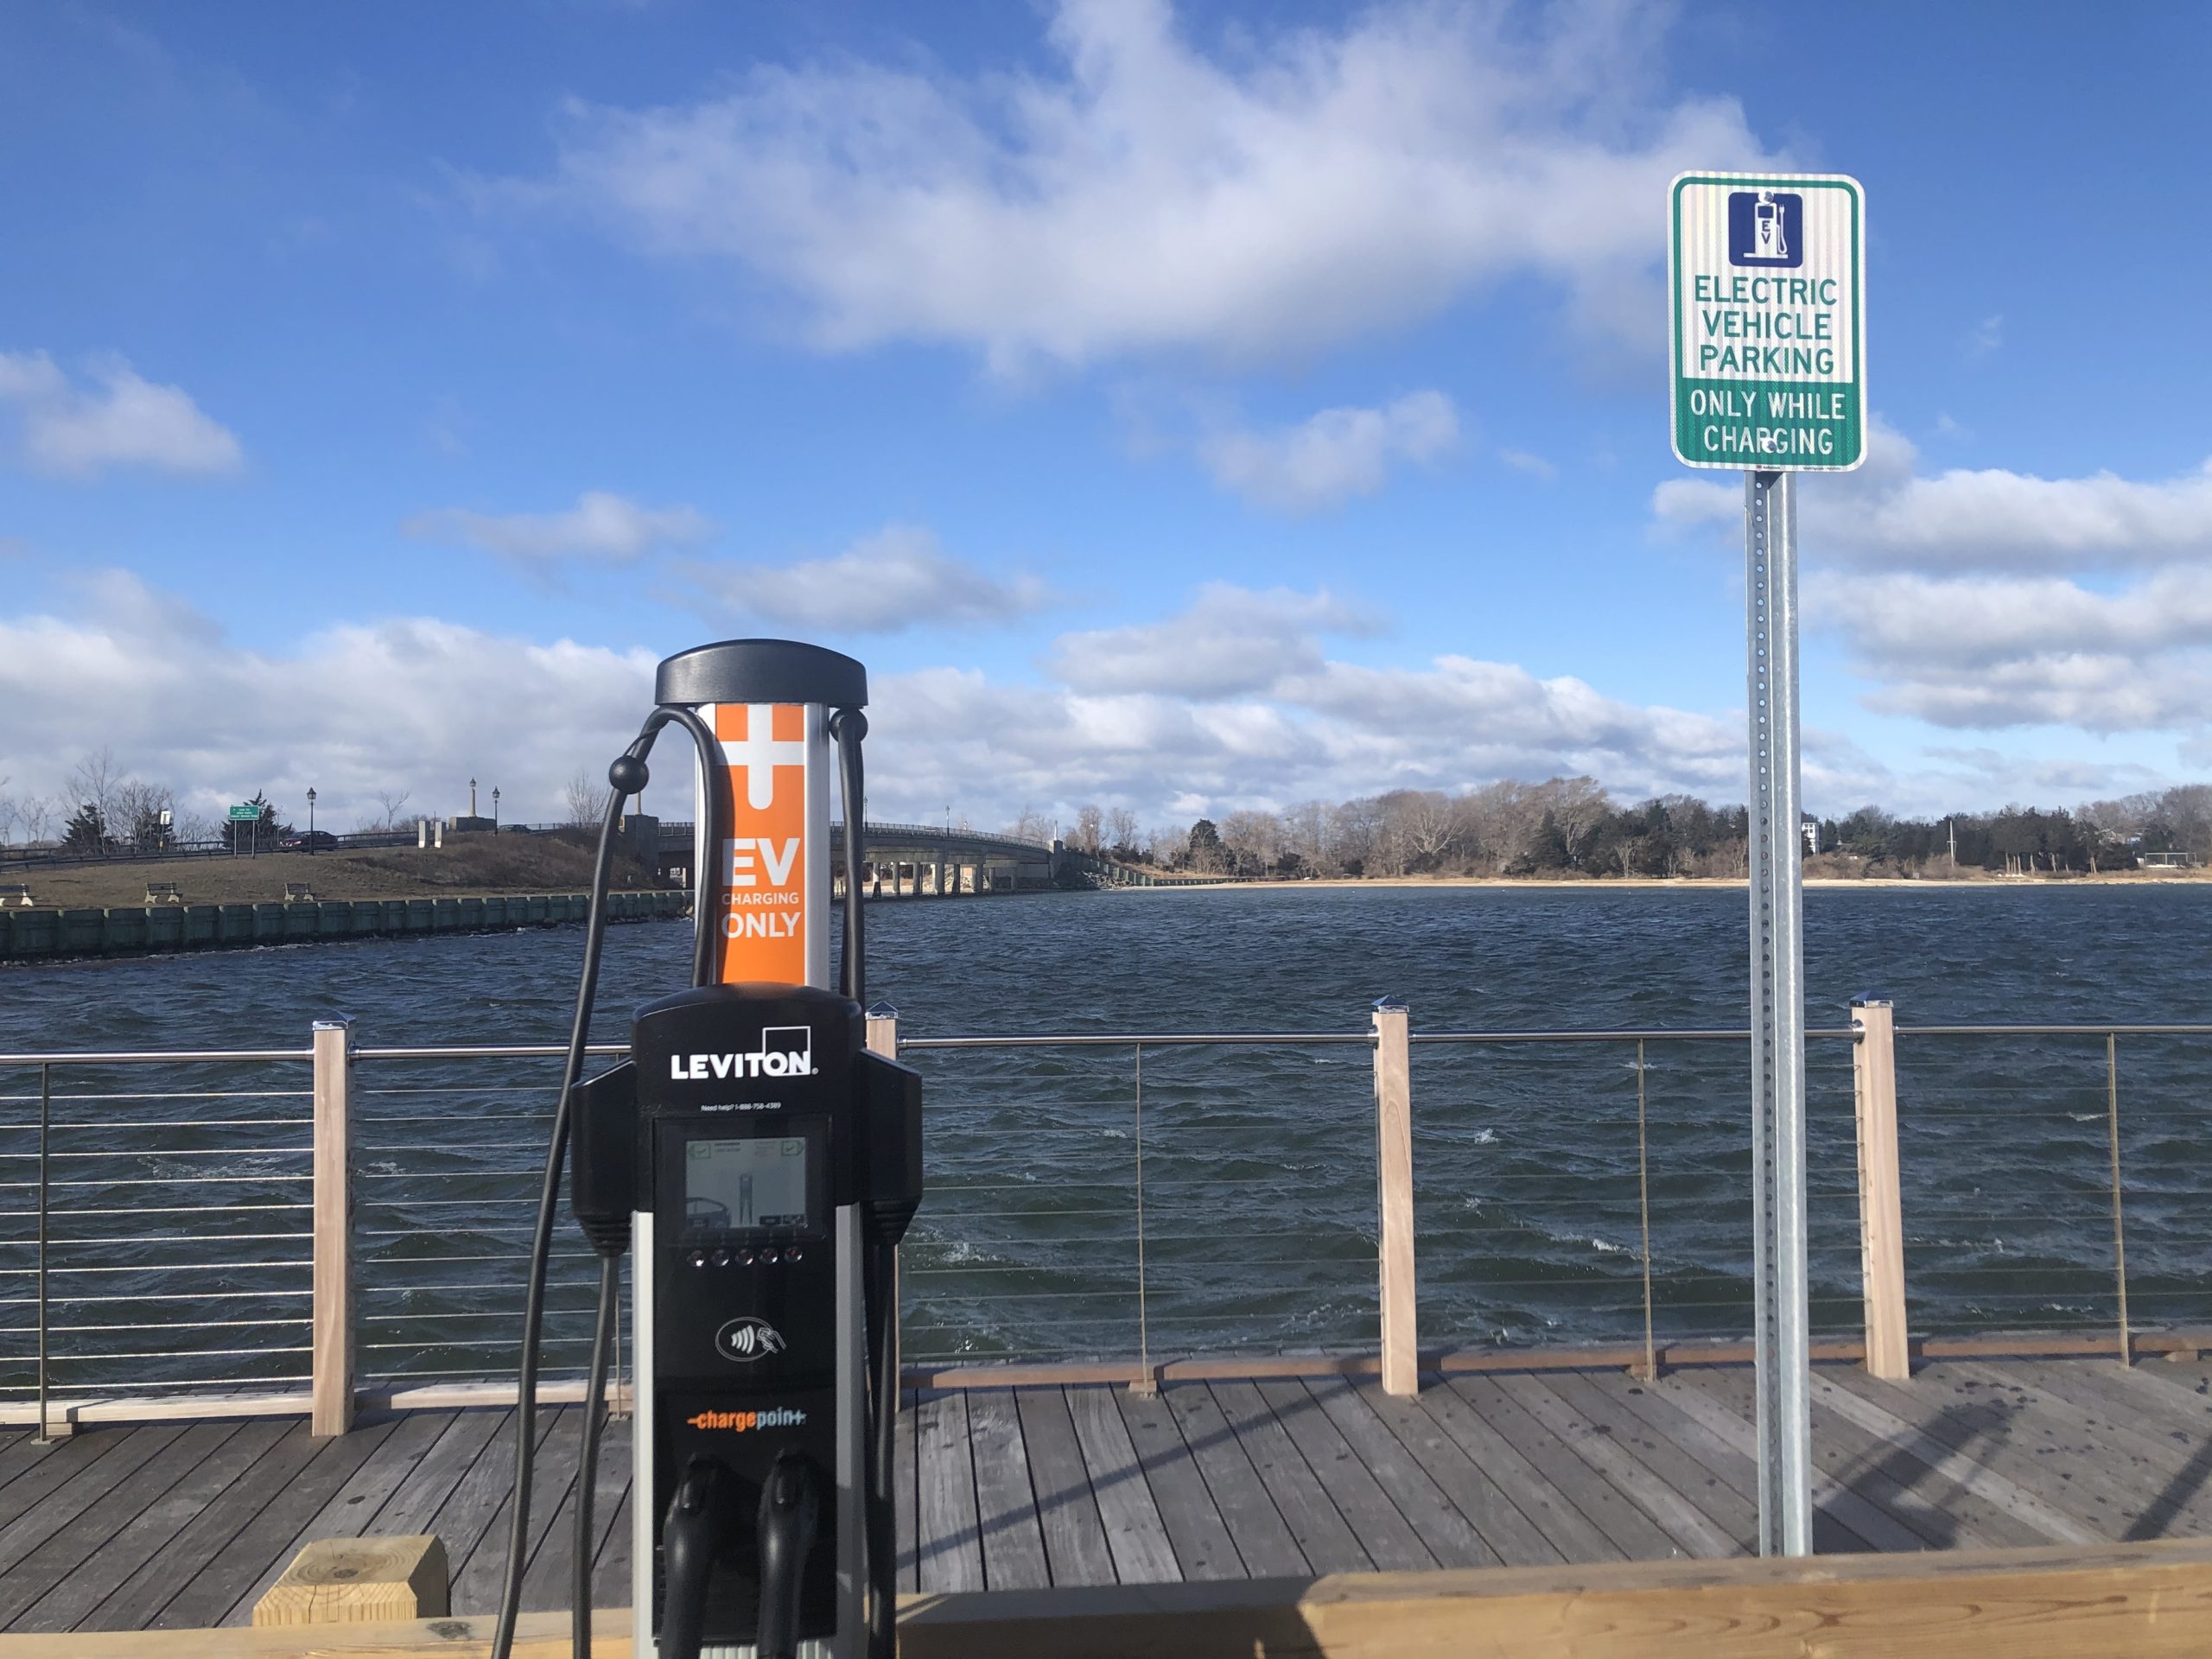 Suffolk County has 492 public charging ports, including this one on Long Wharf in Sag Harbor.